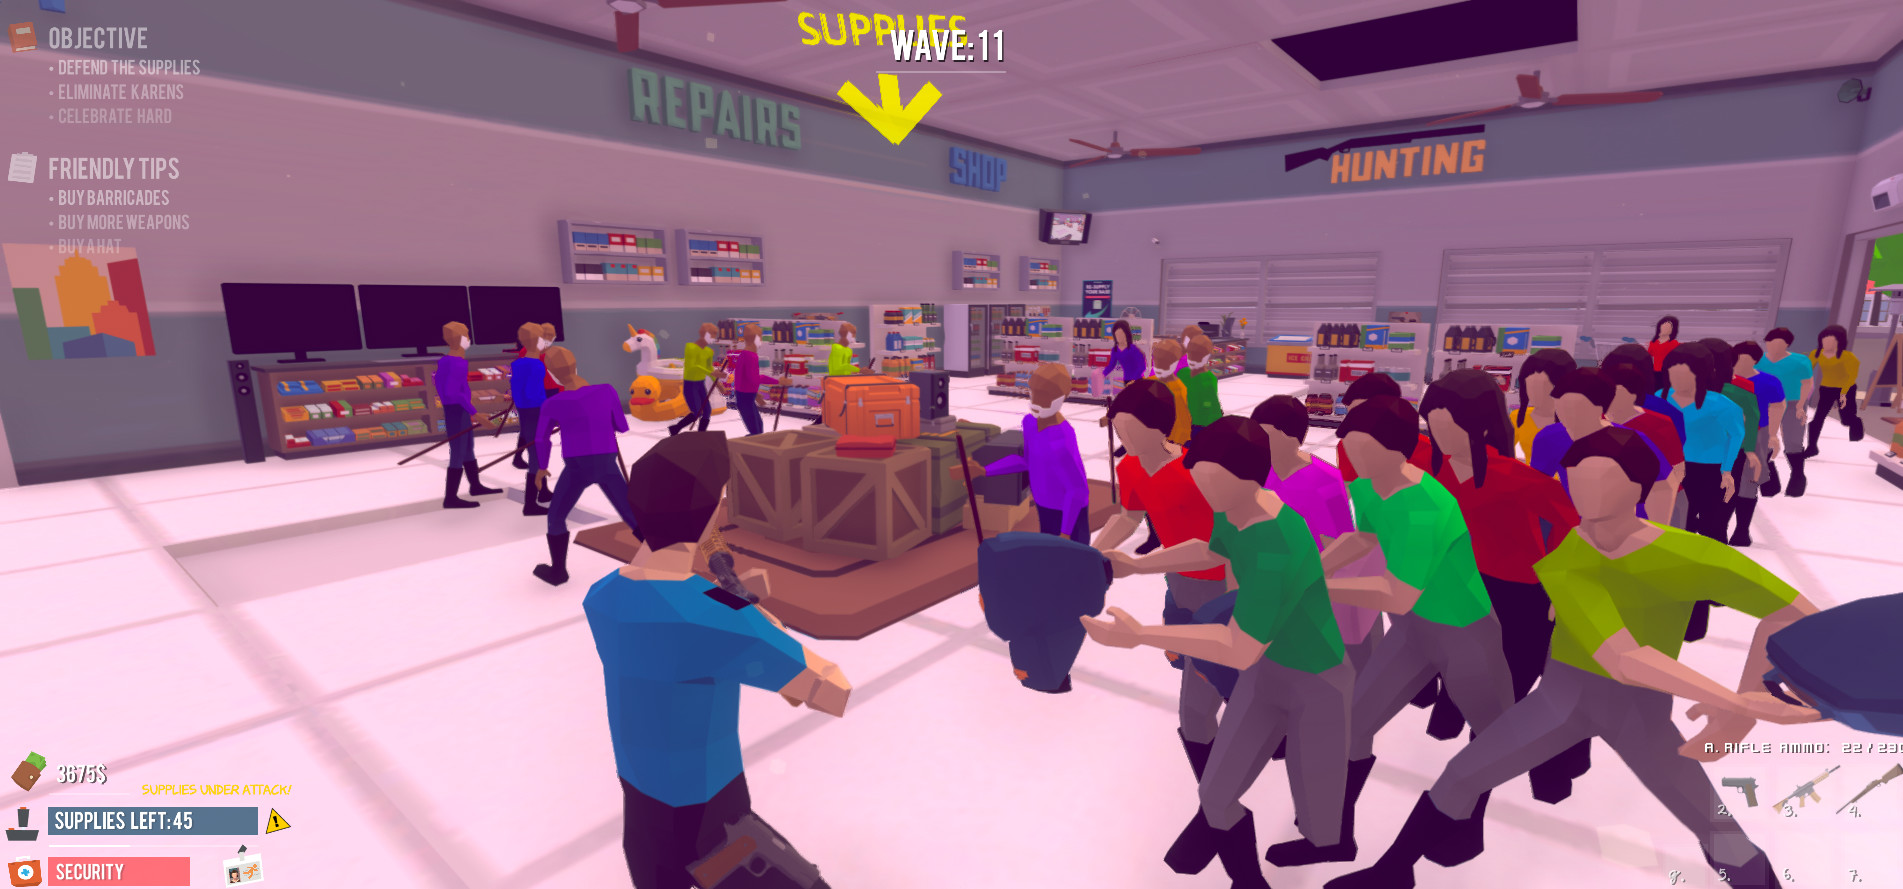 Customers From Hell - Game For Retail Workers (Zombie Survival Game) Free Download